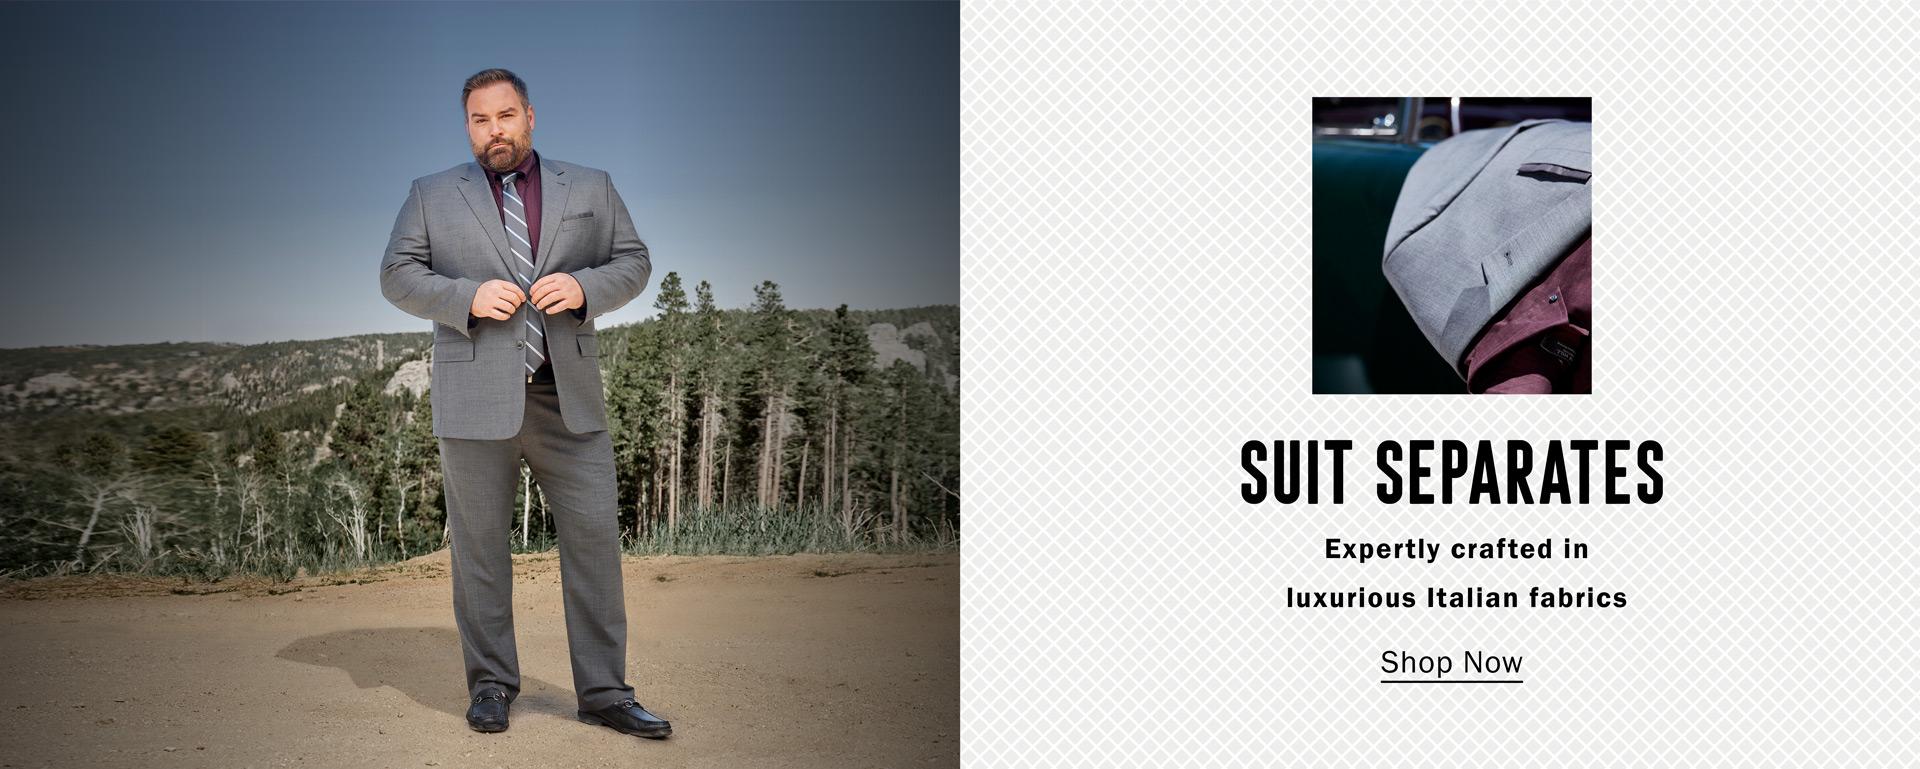 Suit Separates | Expertly crafted in luxurious Italian fabrics | Shop Now